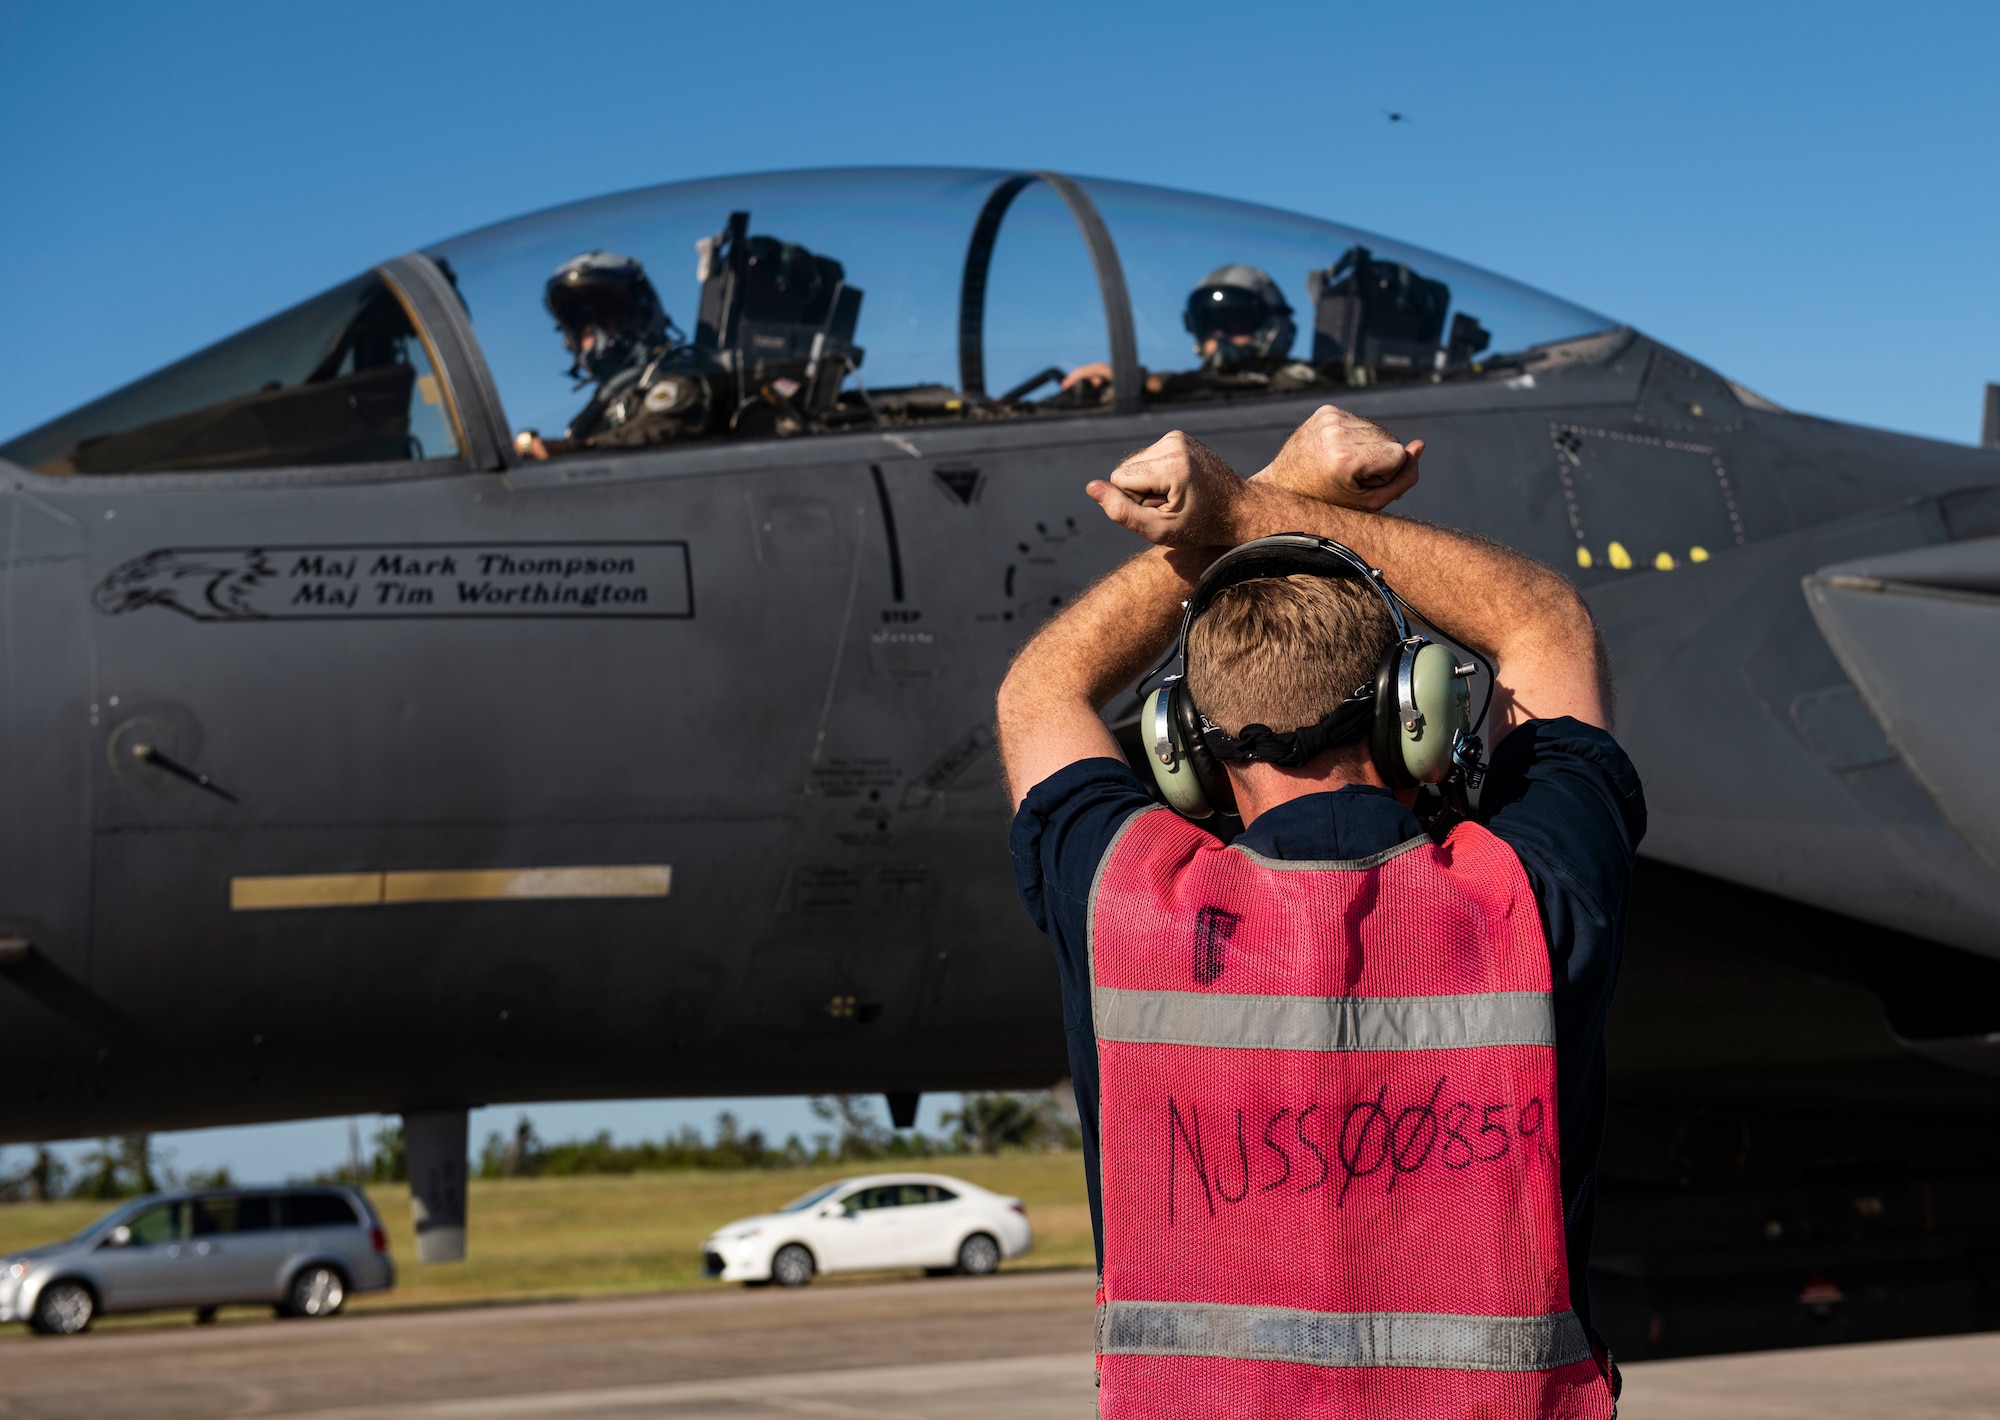 An Airman crosses his arms above his head to signal to two pilots in an aircraft in front of him.